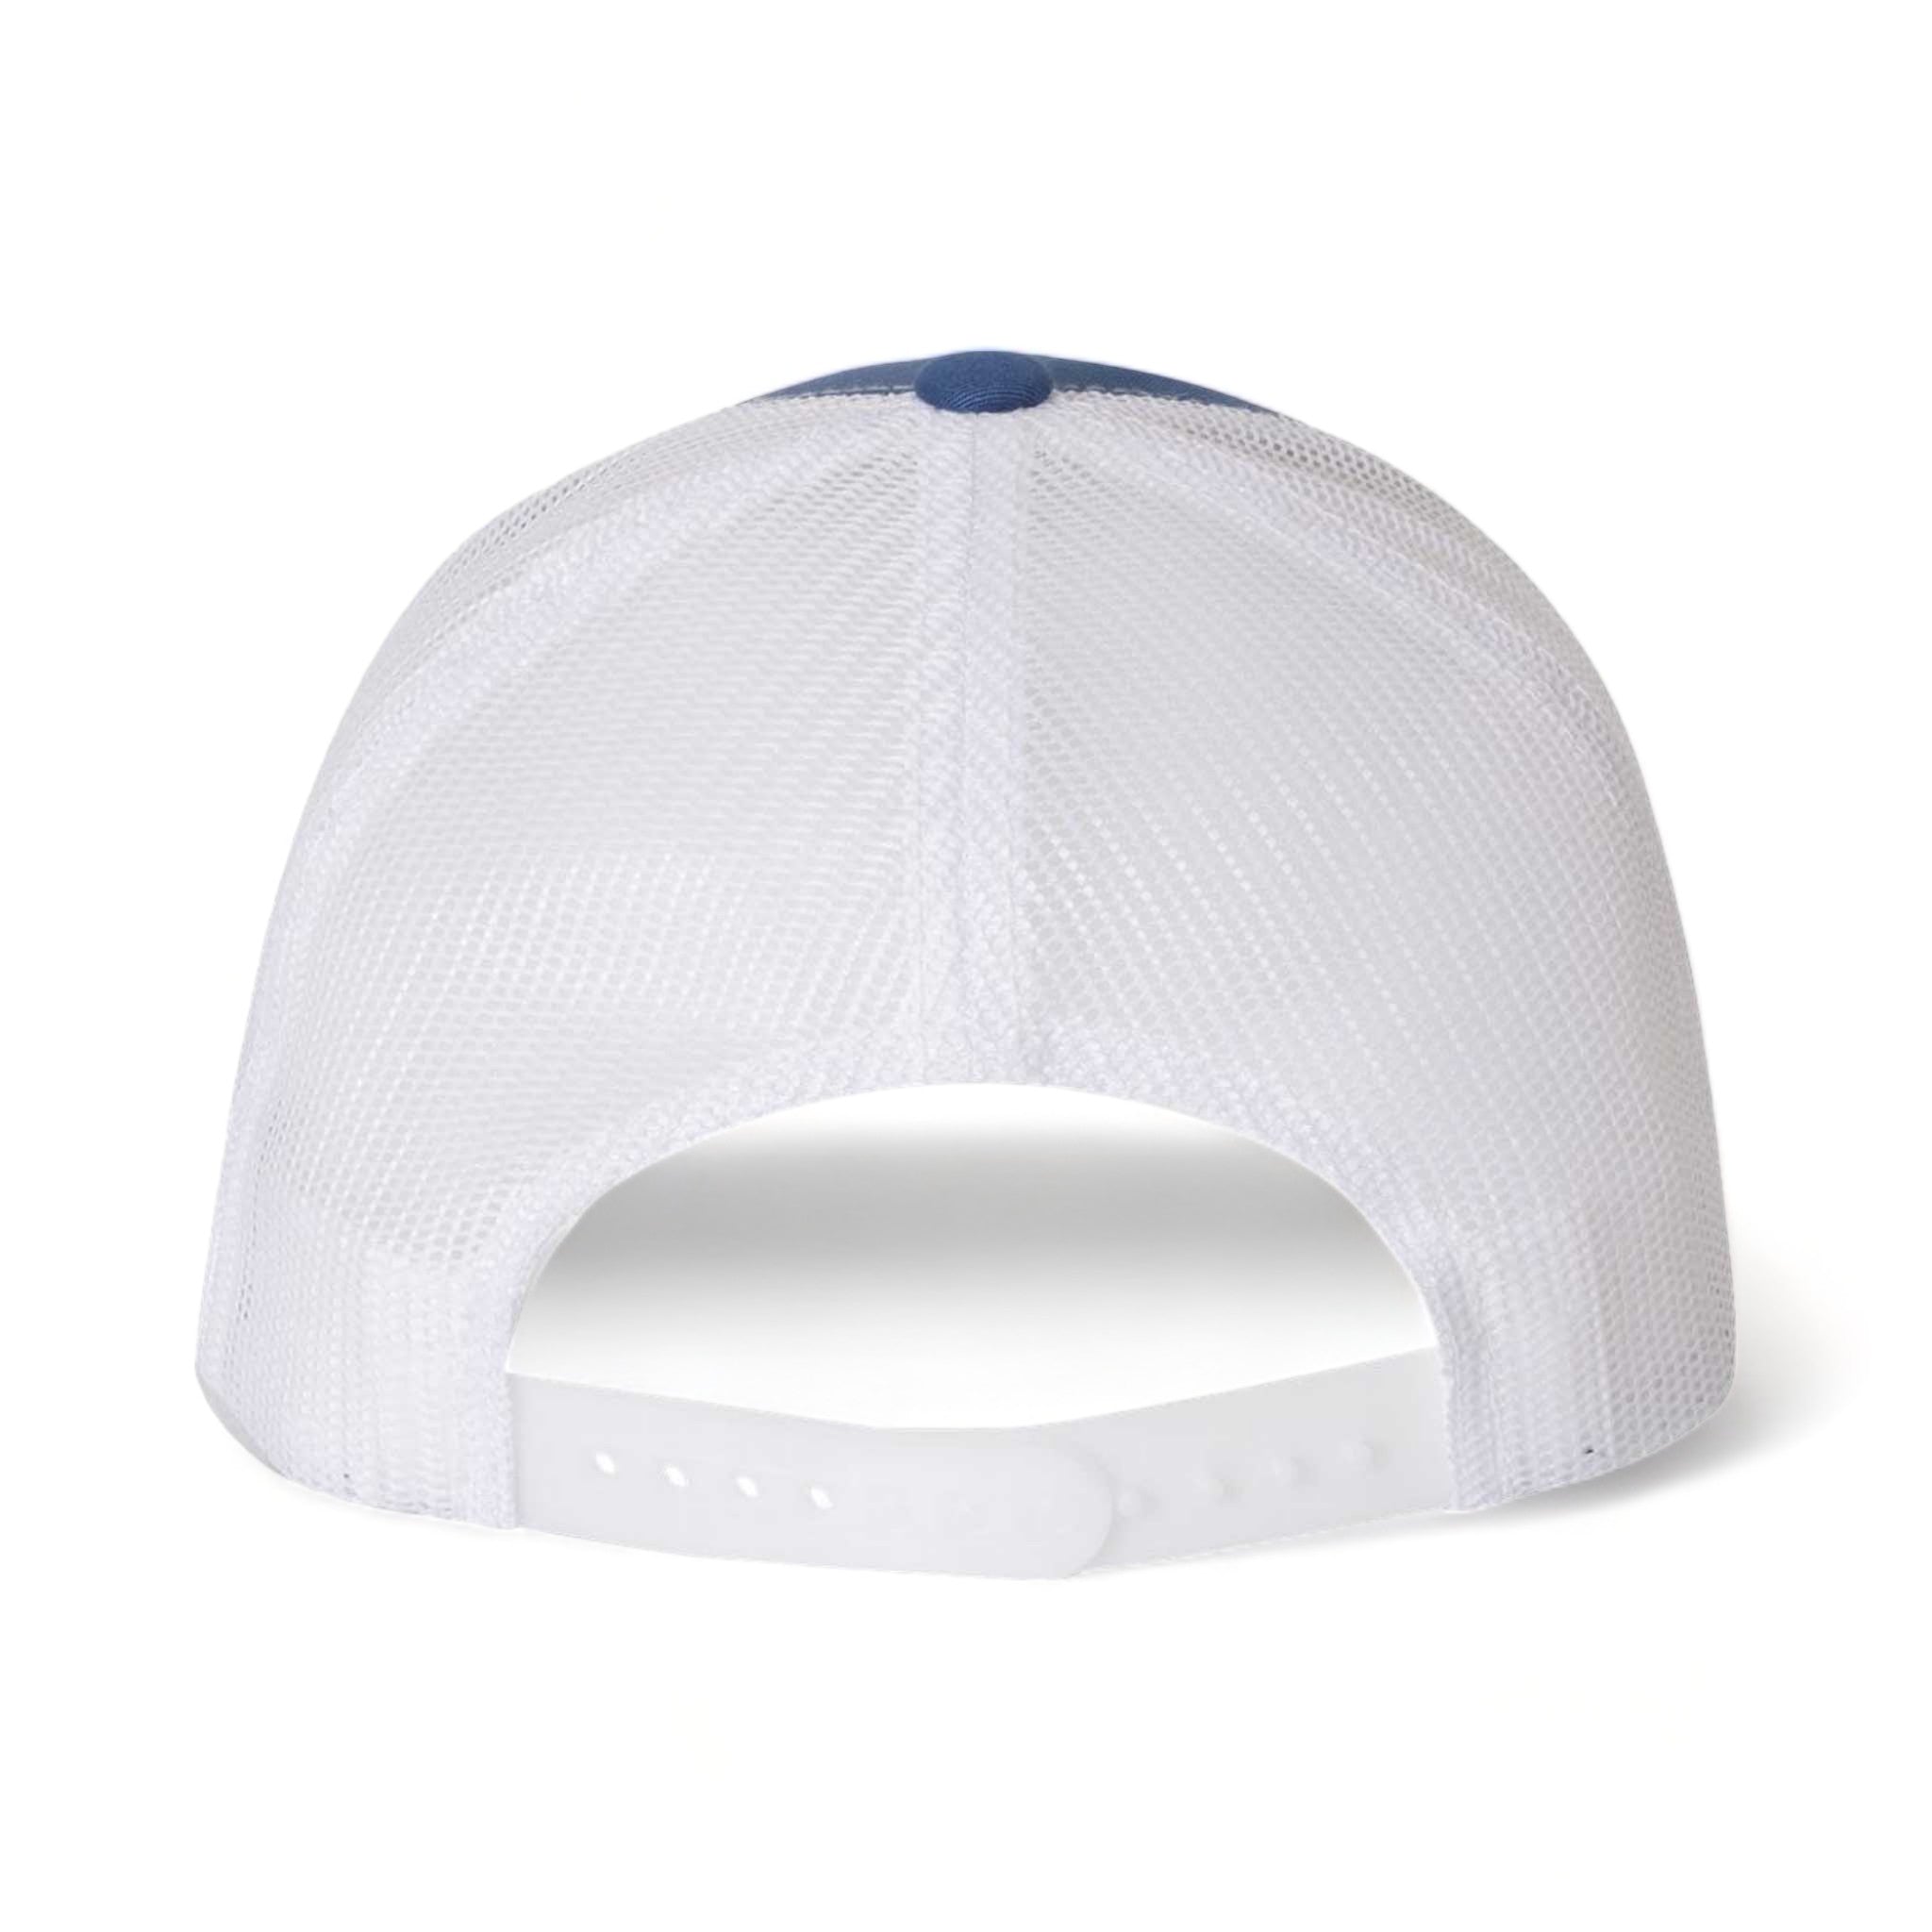 Back view of YP Classics 6606 custom hat in royal and white